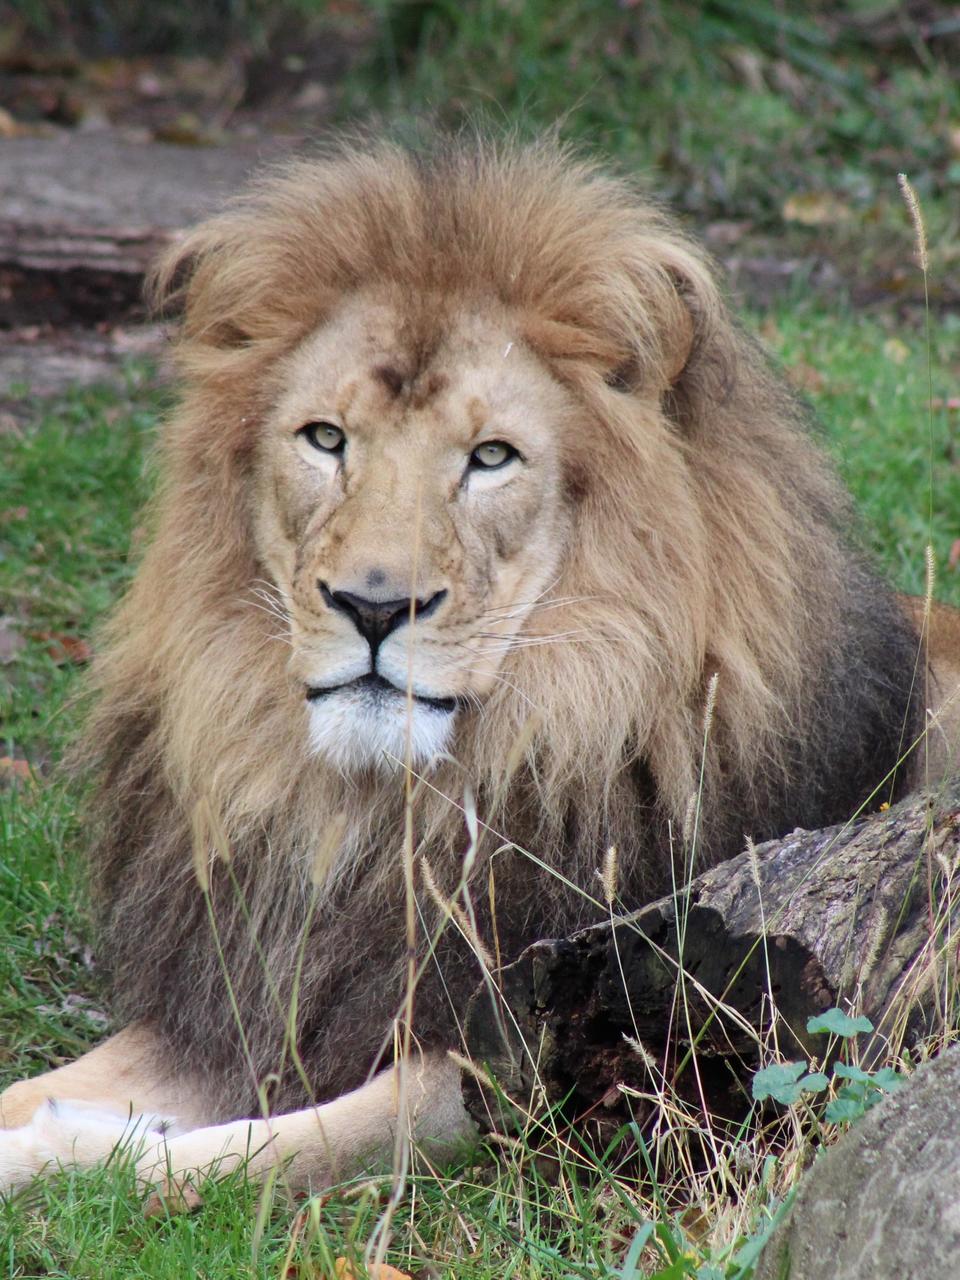 John Ball Zoo To Host Lion Conservation Event To Coincide With